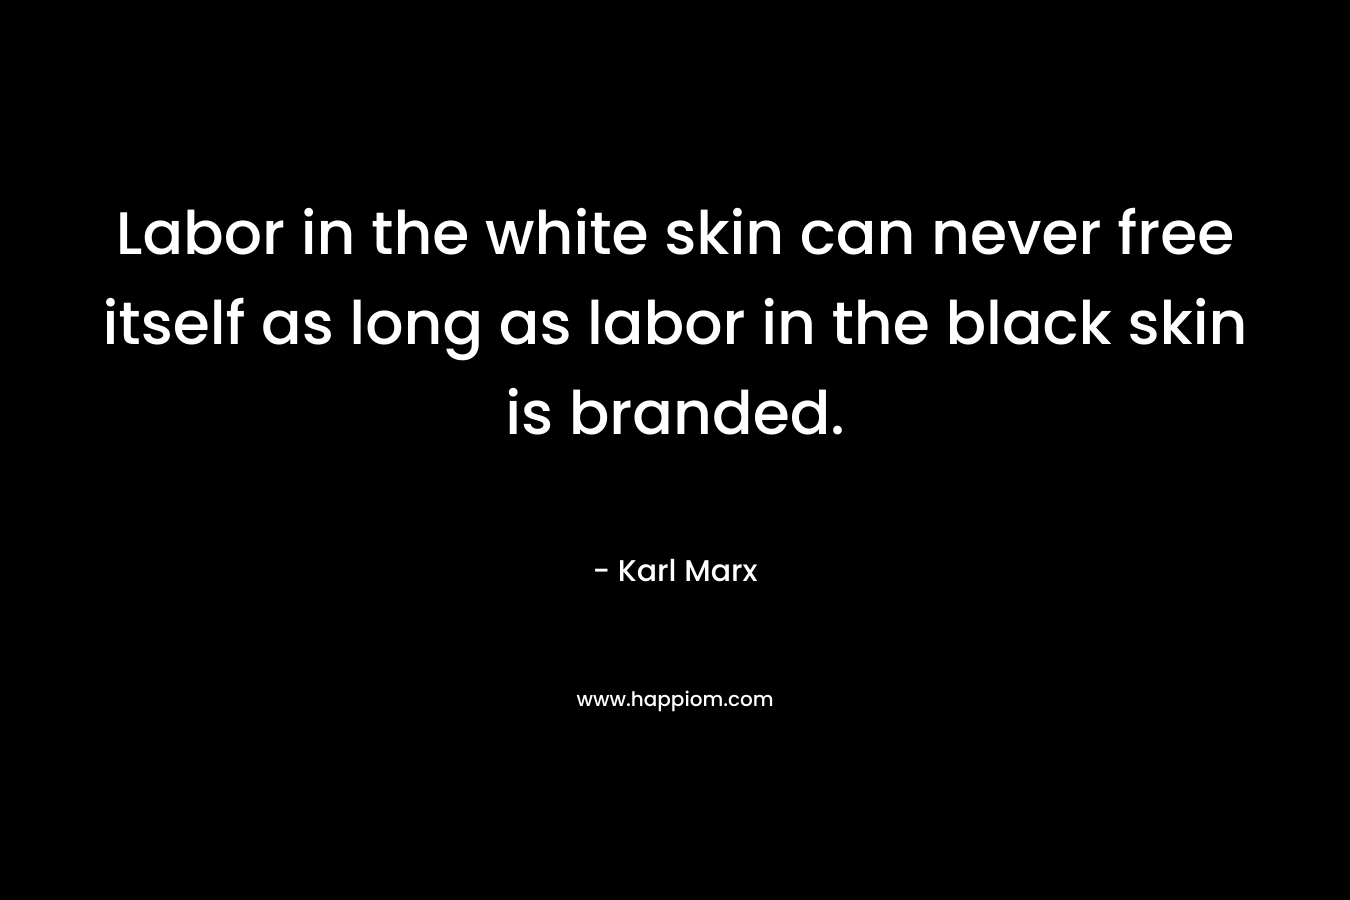 Labor in the white skin can never free itself as long as labor in the black skin is branded. – Karl Marx